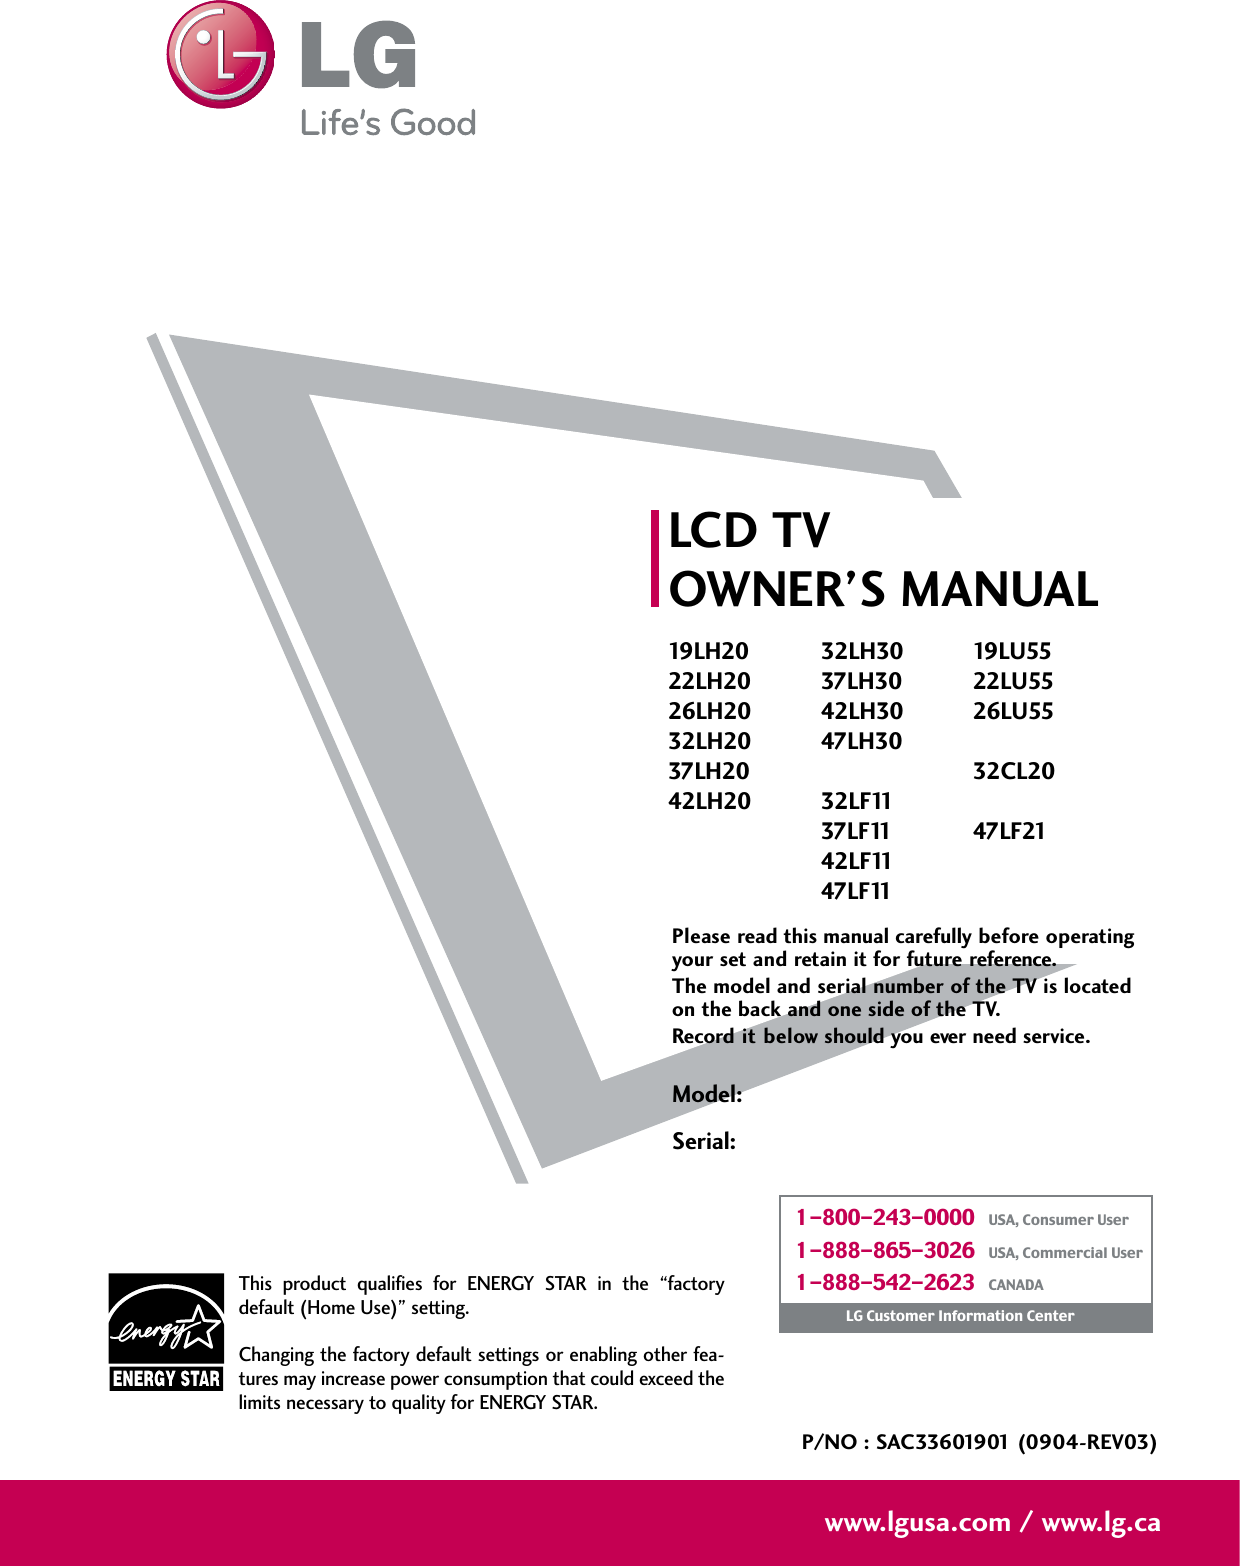 Please read this manual carefully before operatingyour set and retain it for future reference.The model and serial number of the TV is locatedon the back and one side of the TV. Record it below should you ever need service.Model:Serial:LCD TVOWNER’S MANUAL19LH2022LH2026LH2032LH2037LH2042LH2032LH3037LH3042LH3047LH3032LF1137LF1142LF1147LF1119LU5522LU5526LU5532CL2047LF21P/NO : SAC33601901 (0904-REV03)www.lgusa.com / www.lg.caThis  product  qualifies  for  ENERGY  STAR  in  the  “factorydefault (Home Use)” setting.Changing the factory default settings or enabling other fea-tures may increase power consumption that could exceed thelimits necessary to quality for ENERGY STAR.1-800-243-0000   USA, Consumer User1-888-865-3026   USA, Commercial User1-888-542-2623   CANADALG Customer Information Center